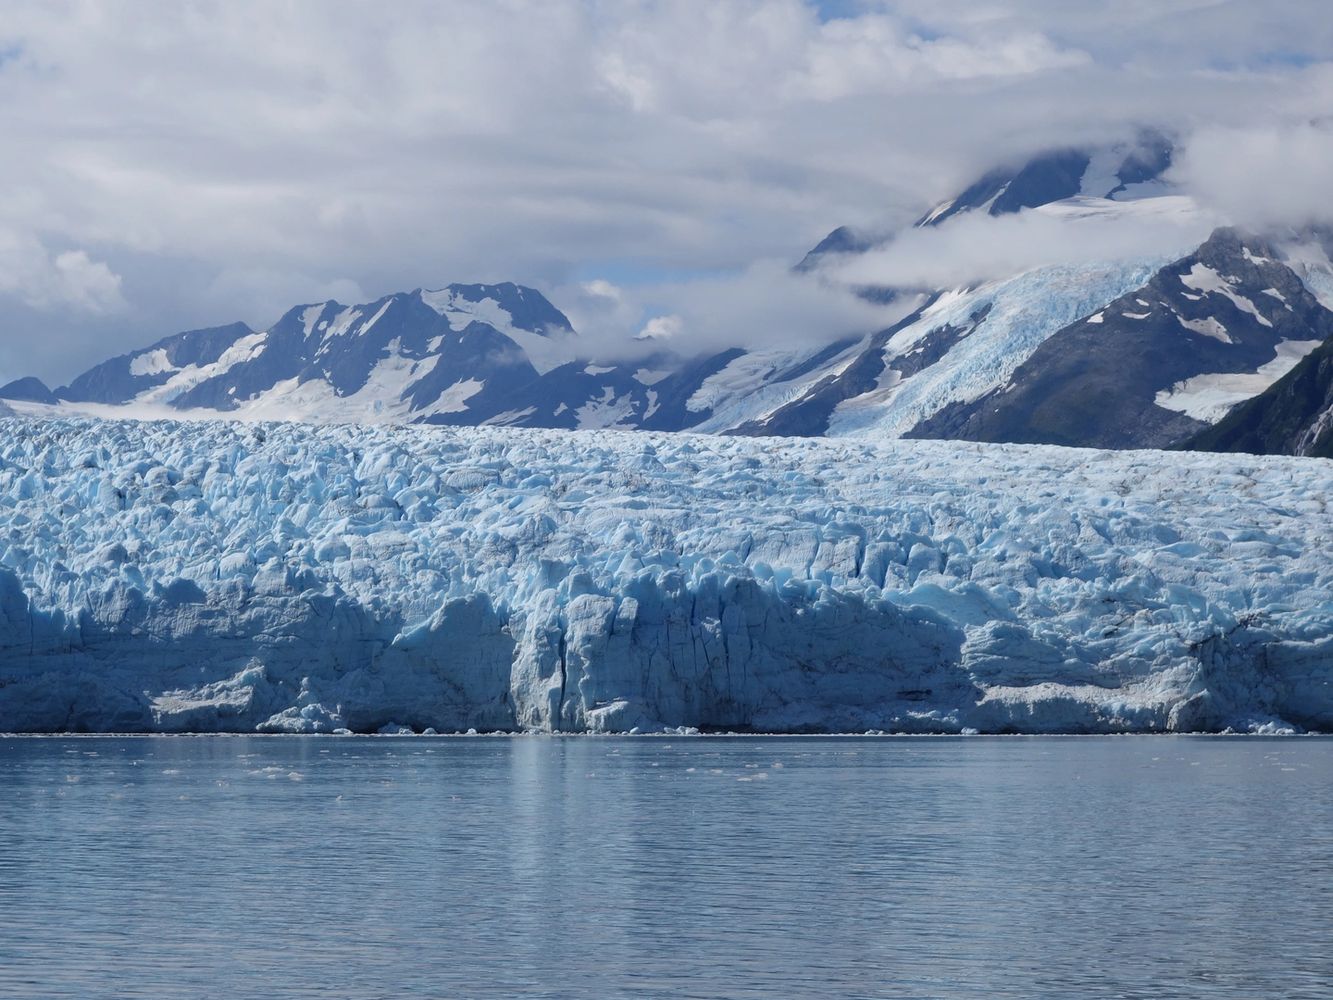 Image shows a glacier against the water, with mountains and clouds behind the glacier.